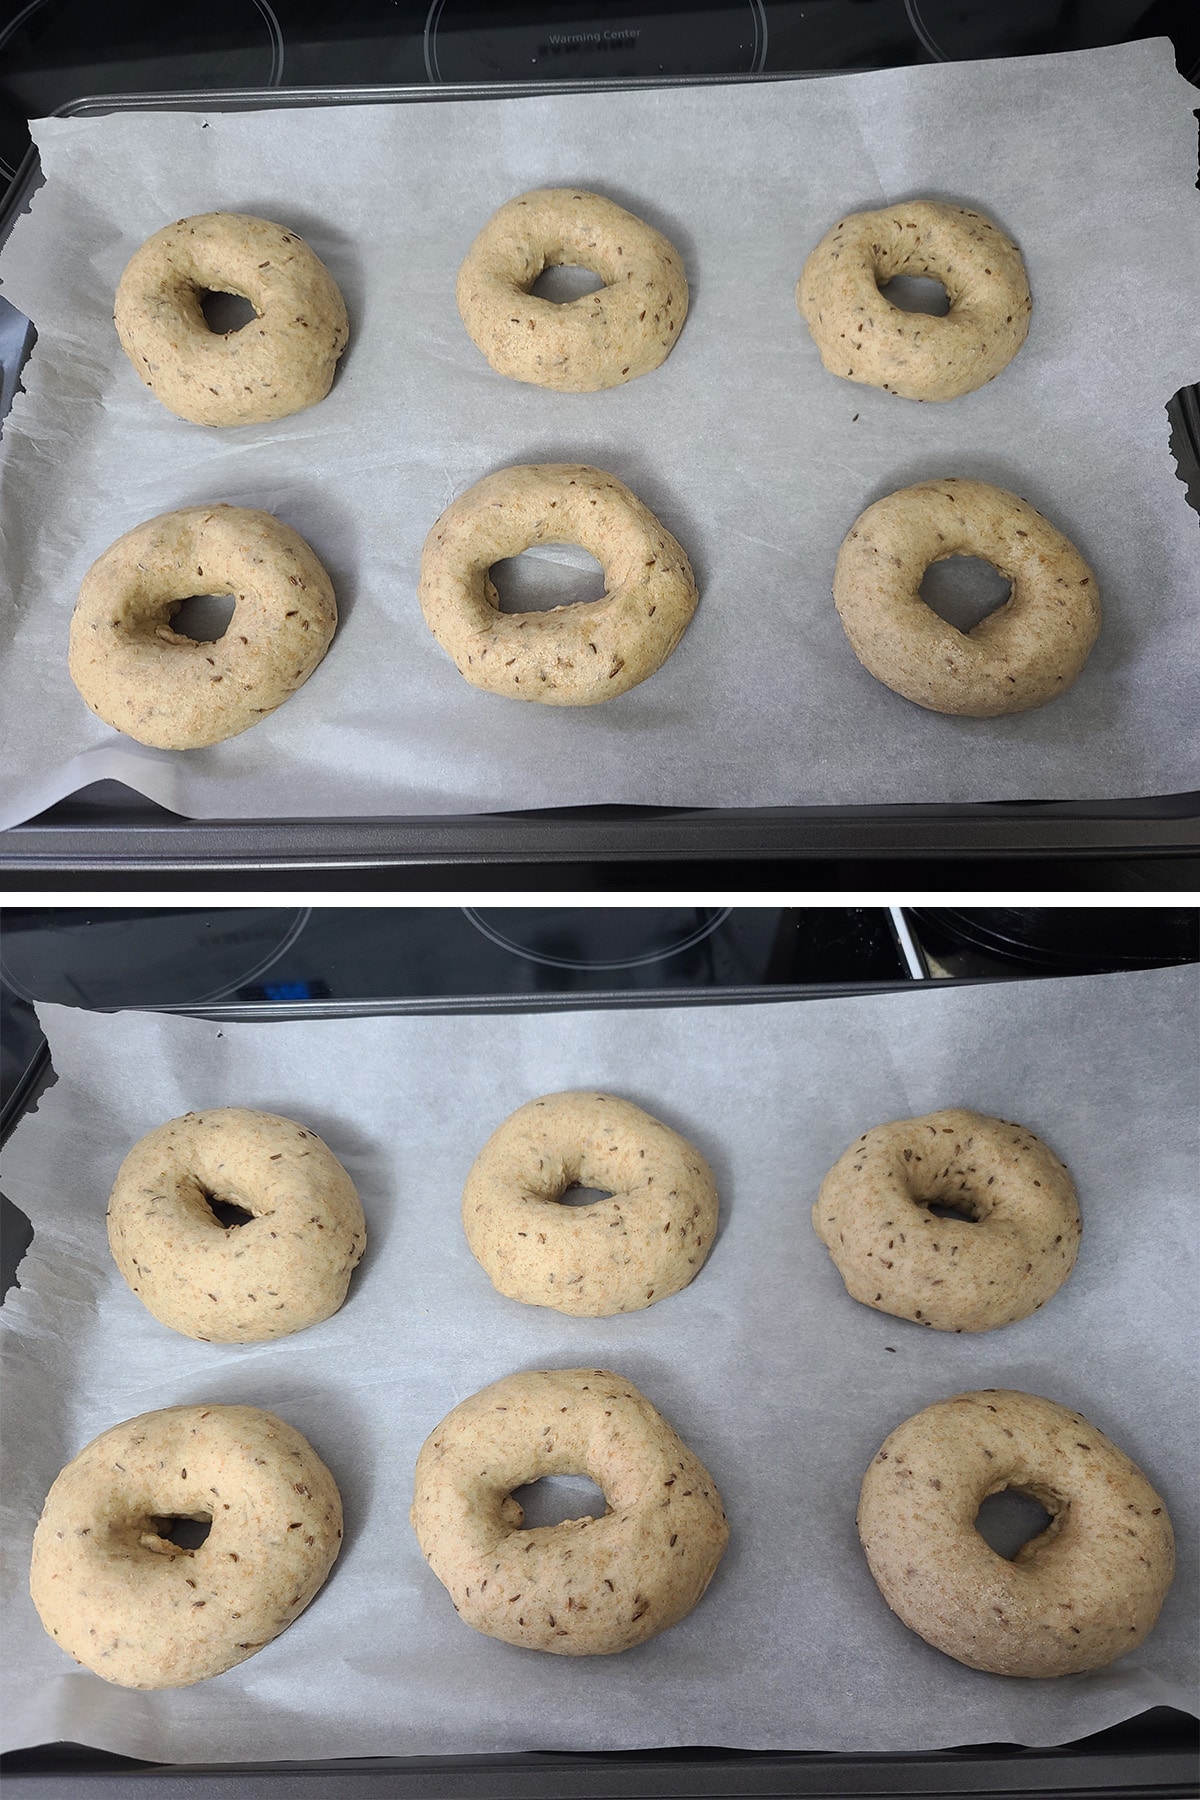 A 2 part image showing a tray of 6 pages, before and after the final rise.